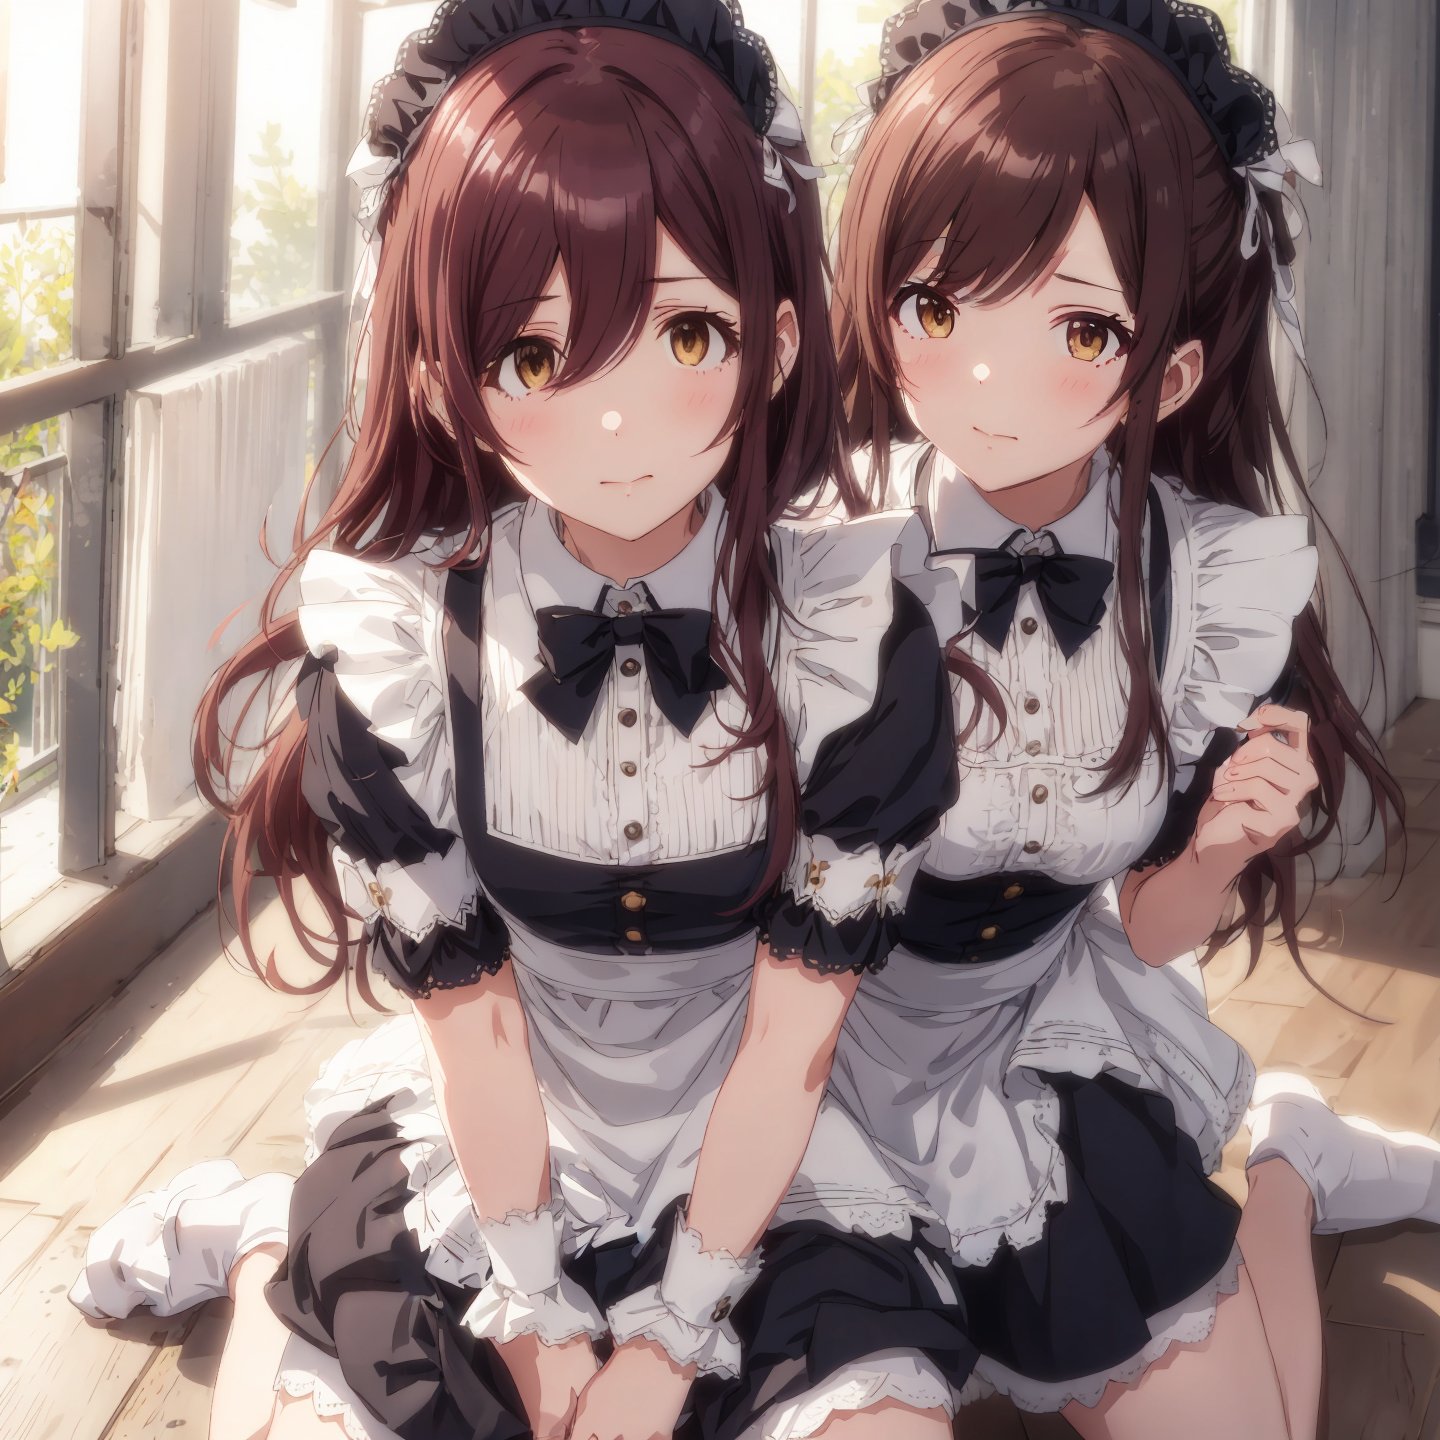 Anime 1440x1440 AI art anime girls THE iDOLM@STER THE iDOLM@STER: Shiny Colors Oosaki Amana long hair brunette maid maid outfit two women twins artwork digital art fan art Oosaki Tenka sunlight hair between eyes anime closed mouth blushing